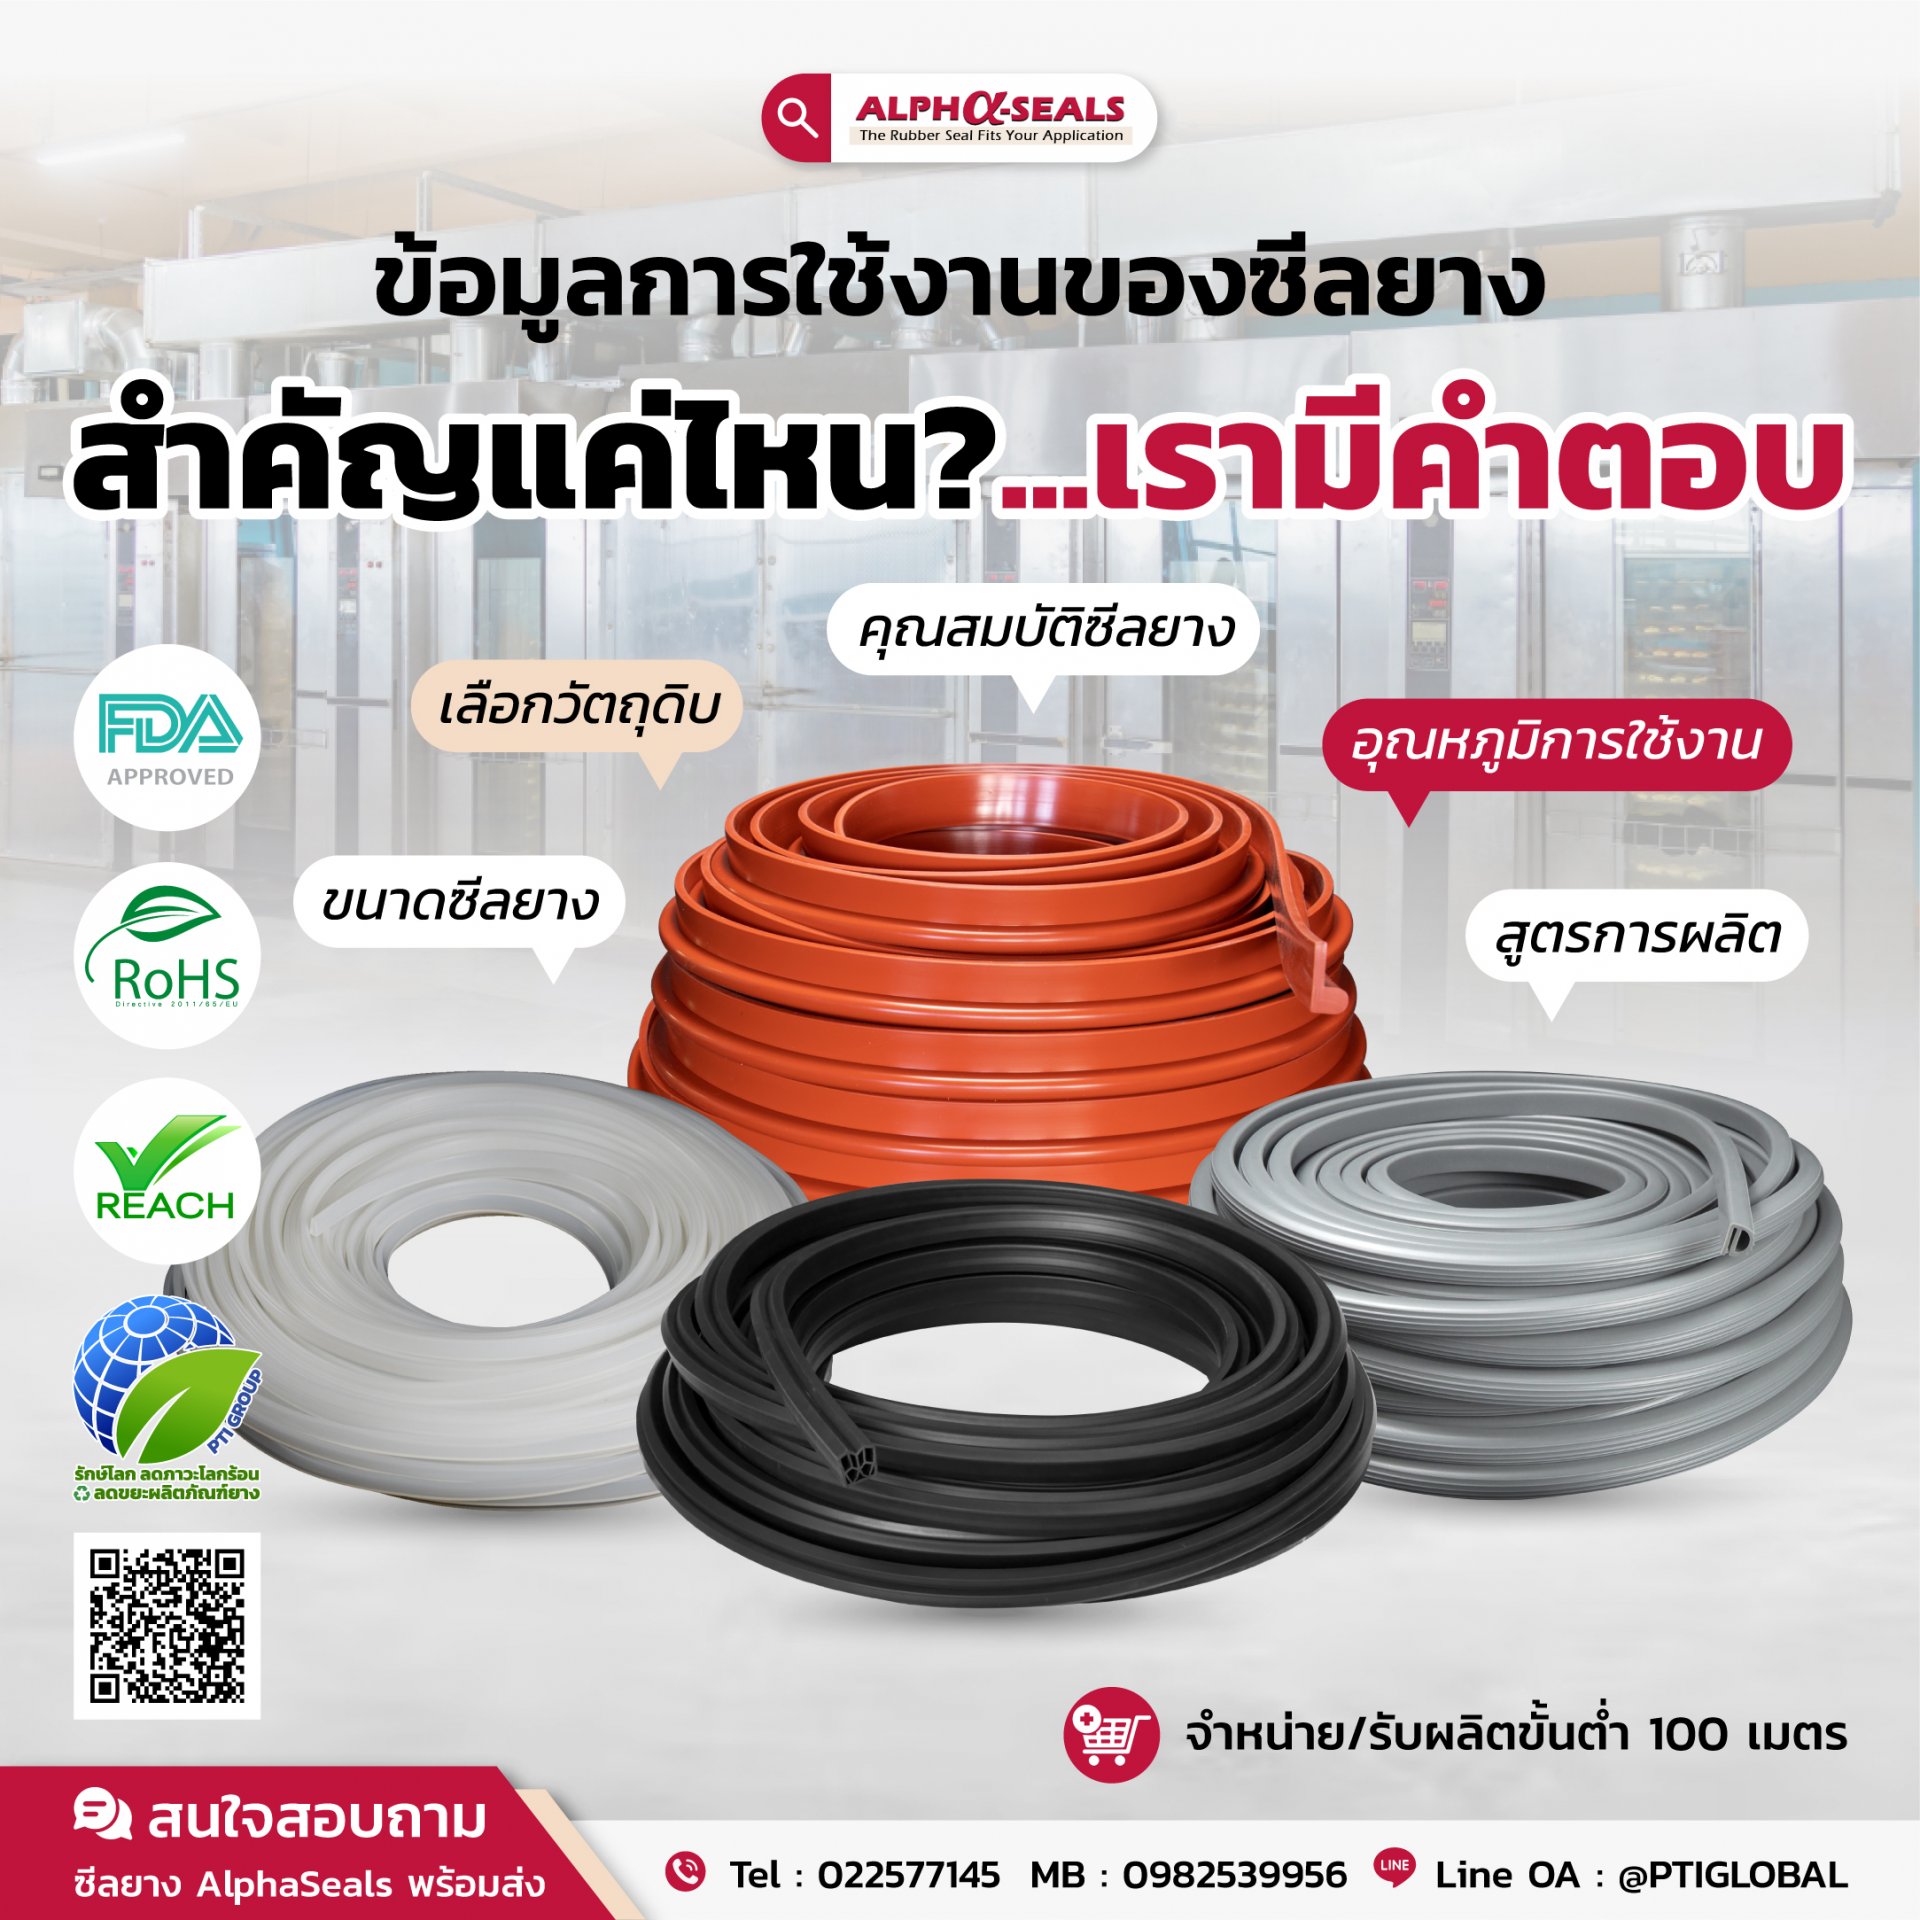 How important is the usage information of rubber seals?